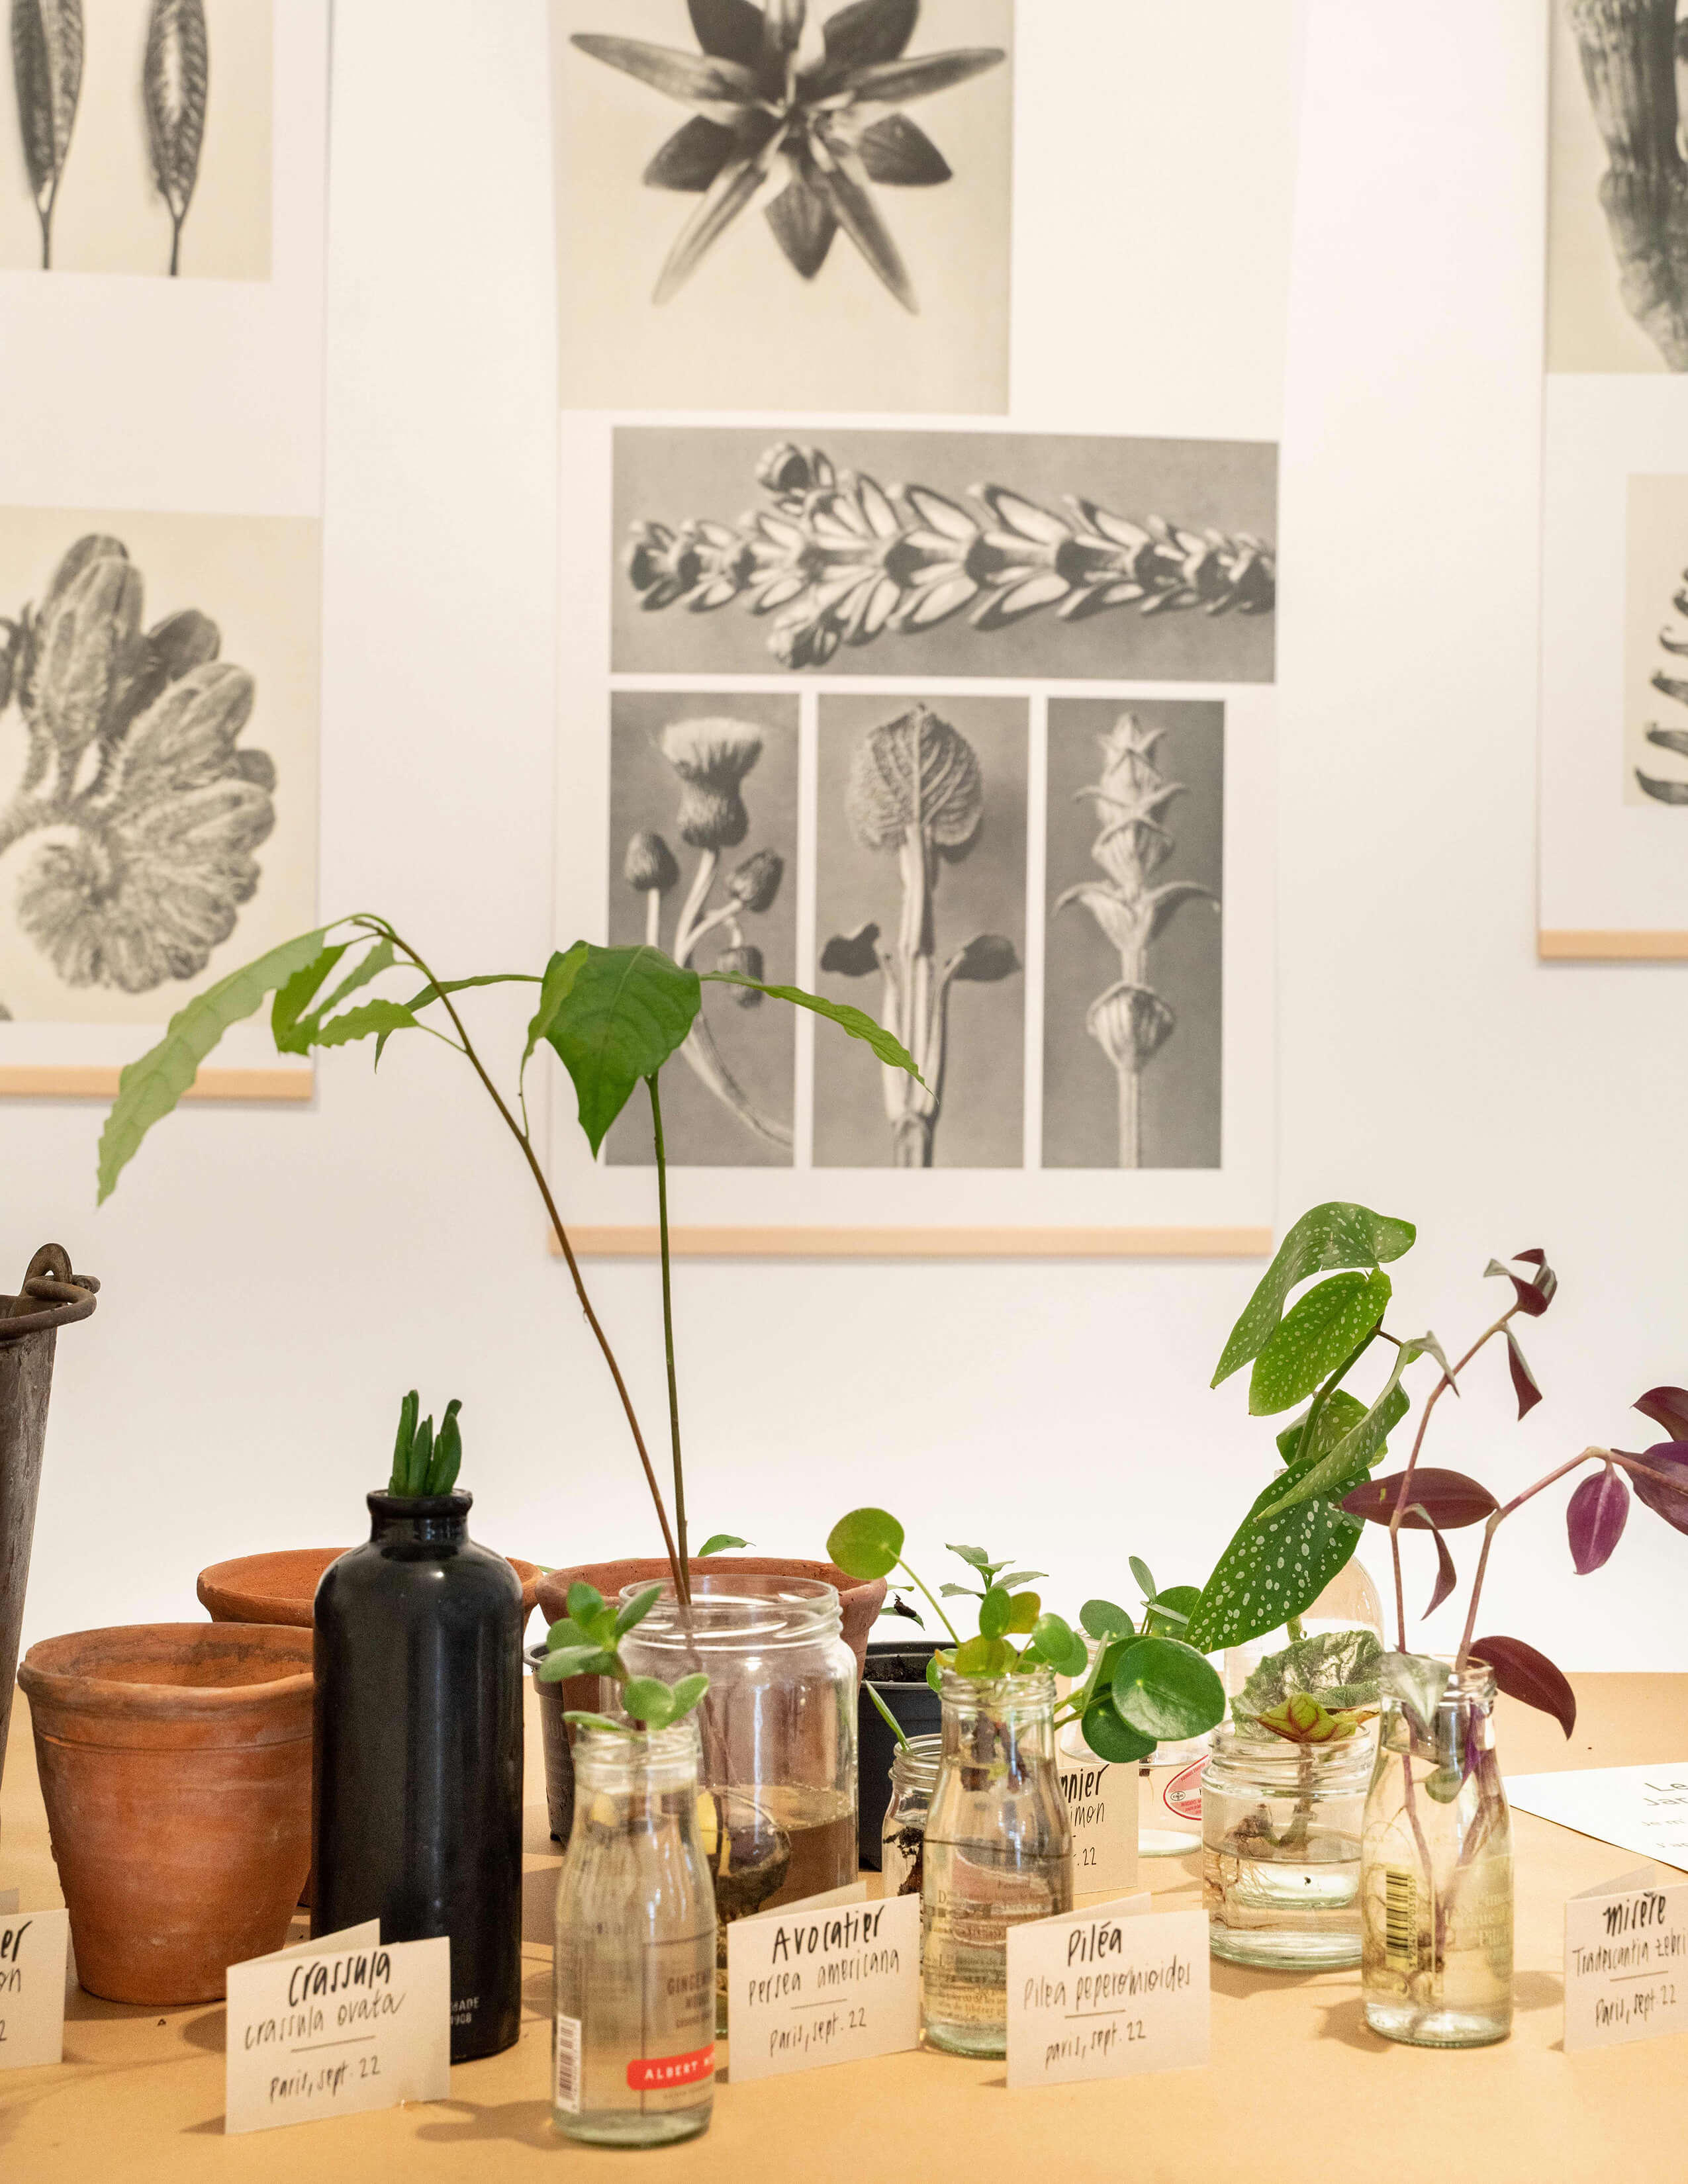 A variety of plants grow from different sizes of glass bottles with plant name tags next to each on the table. And there are pieces of black and white art hung on the wall.